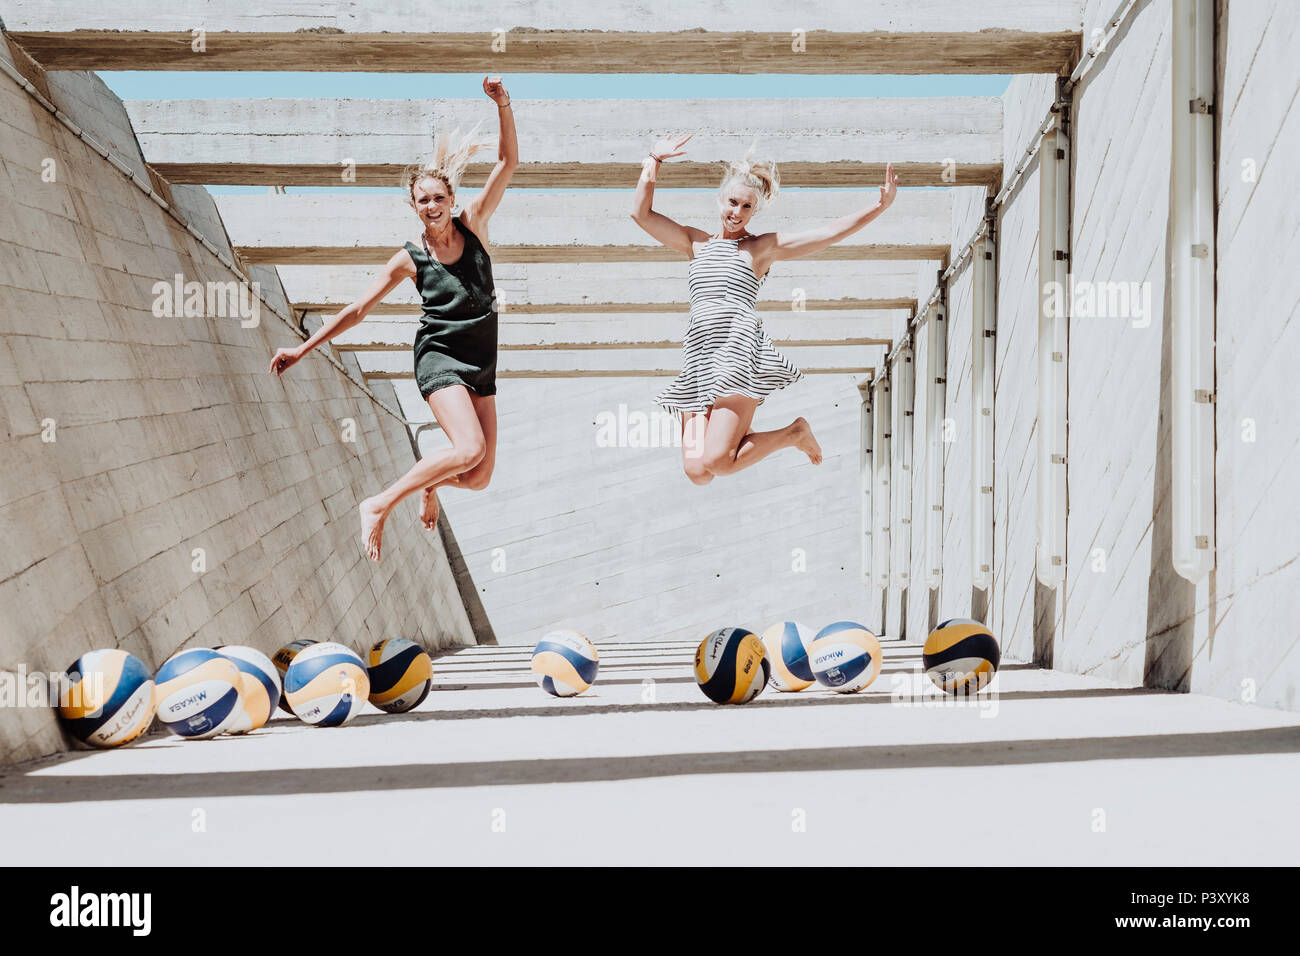 Beach Volley players, Karla Borger and Maggie Kozuch, jump for a portrait surrounded by volleyball balls Stock Photo